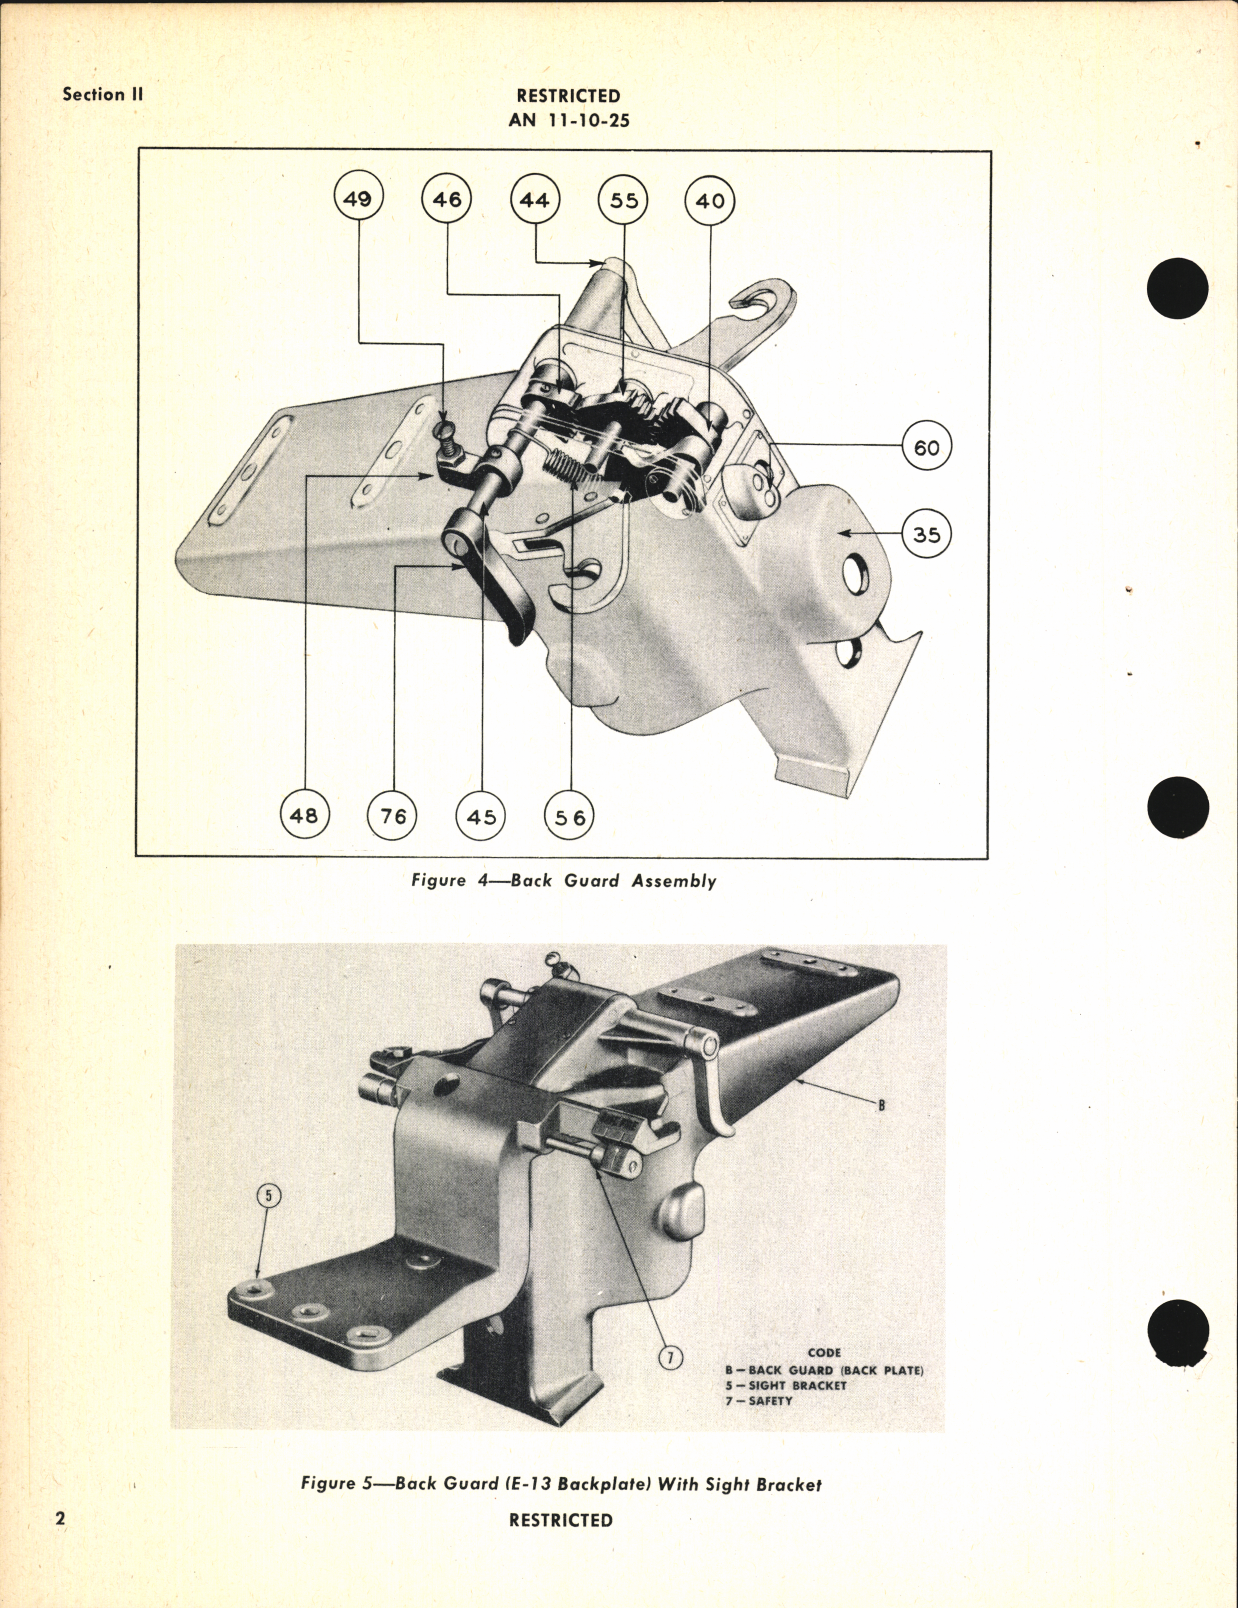 Sample page 6 from AirCorps Library document: Handbook of Instructions with Parts Catalog for Single Adapters for Caliber .50 Machine Guns